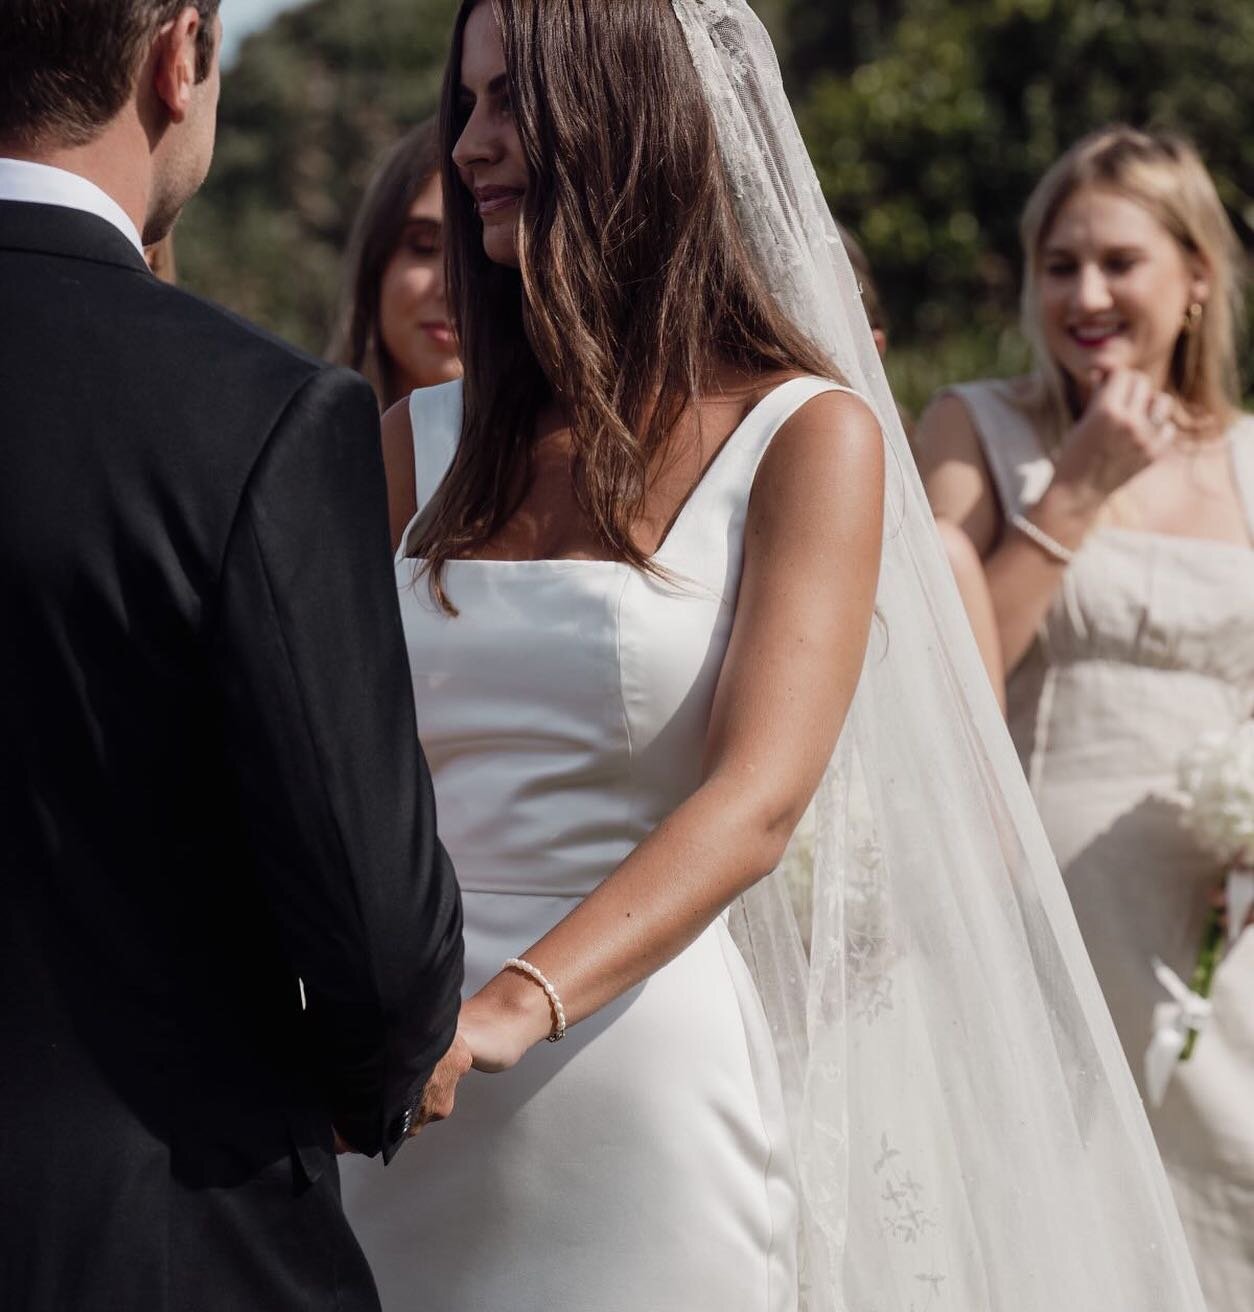 💫 The most beautiful bride Izzy wearing her custom pearl bracelet on her wedding day! Izzy also got matching bracelets for her bridesmaids! So heartwarming!! 🥹🥲